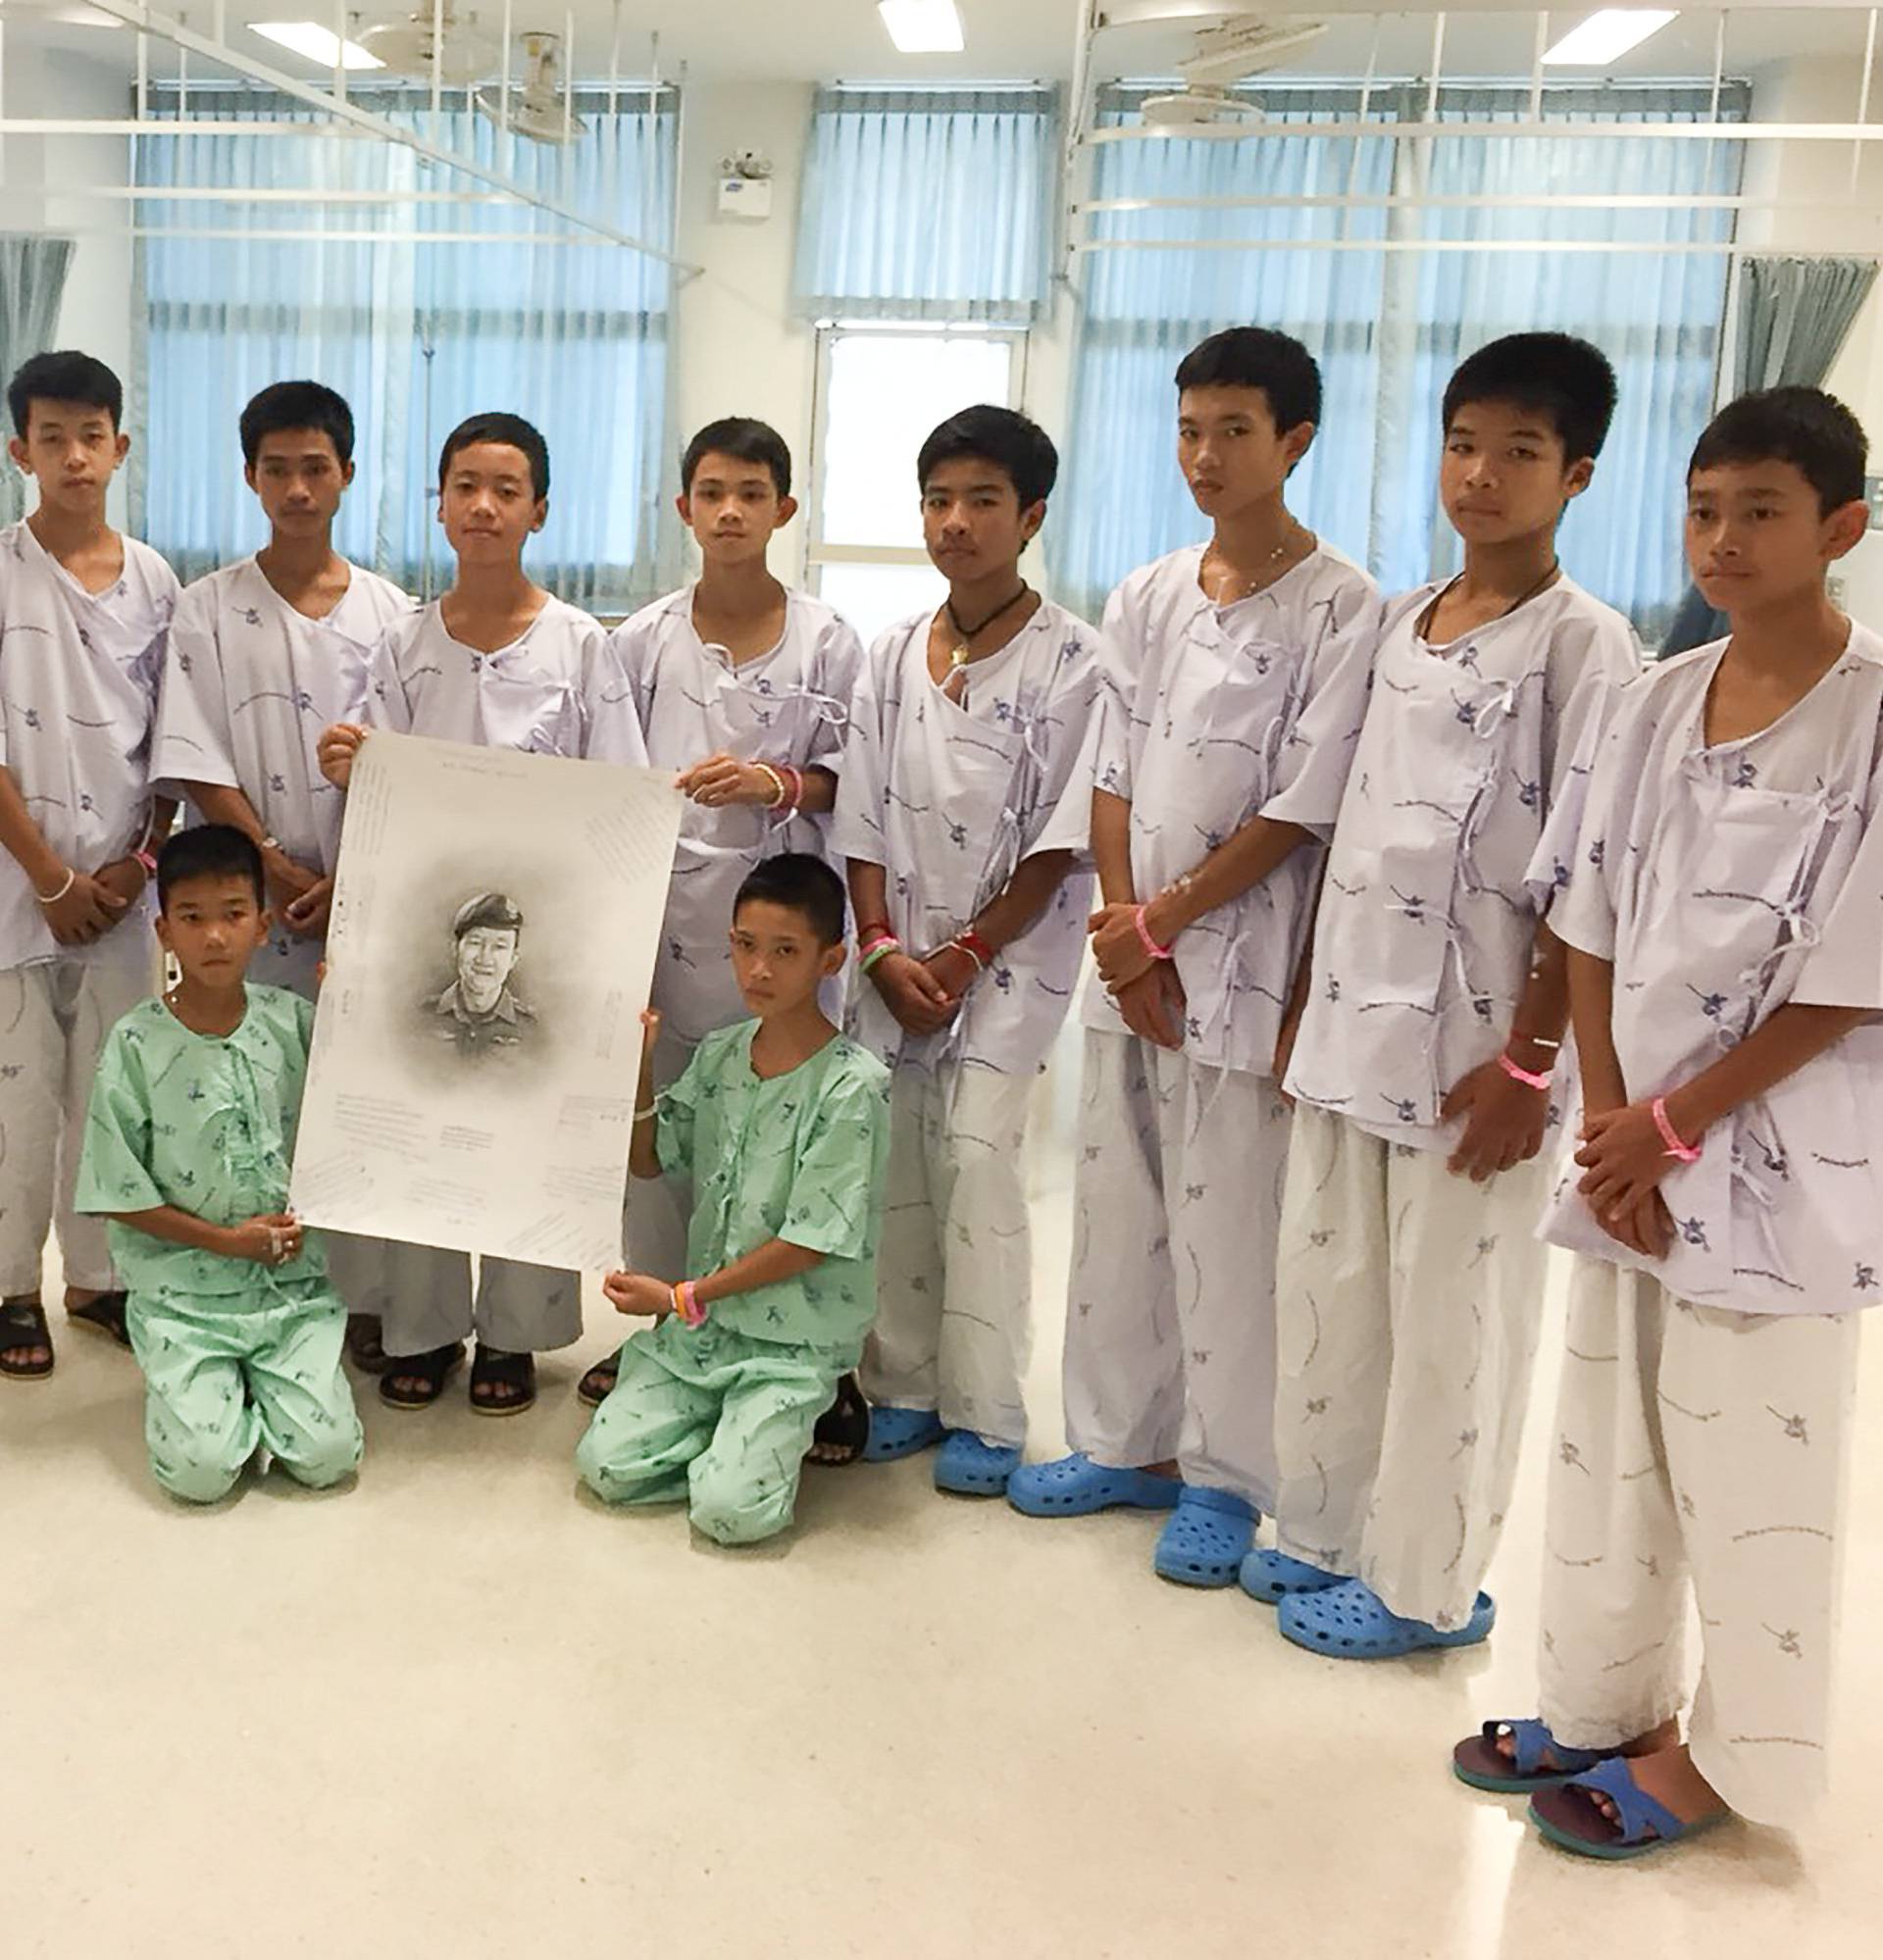 The 12-member "Wild Boars" soccer team and their coach rescued from a flooded cave pose with a drawing picture of Samarn Kunan, a former Thai navy diver who died working to rescue them at the Chiang Rai Prachanukroh Hospital, in Chiang Rai